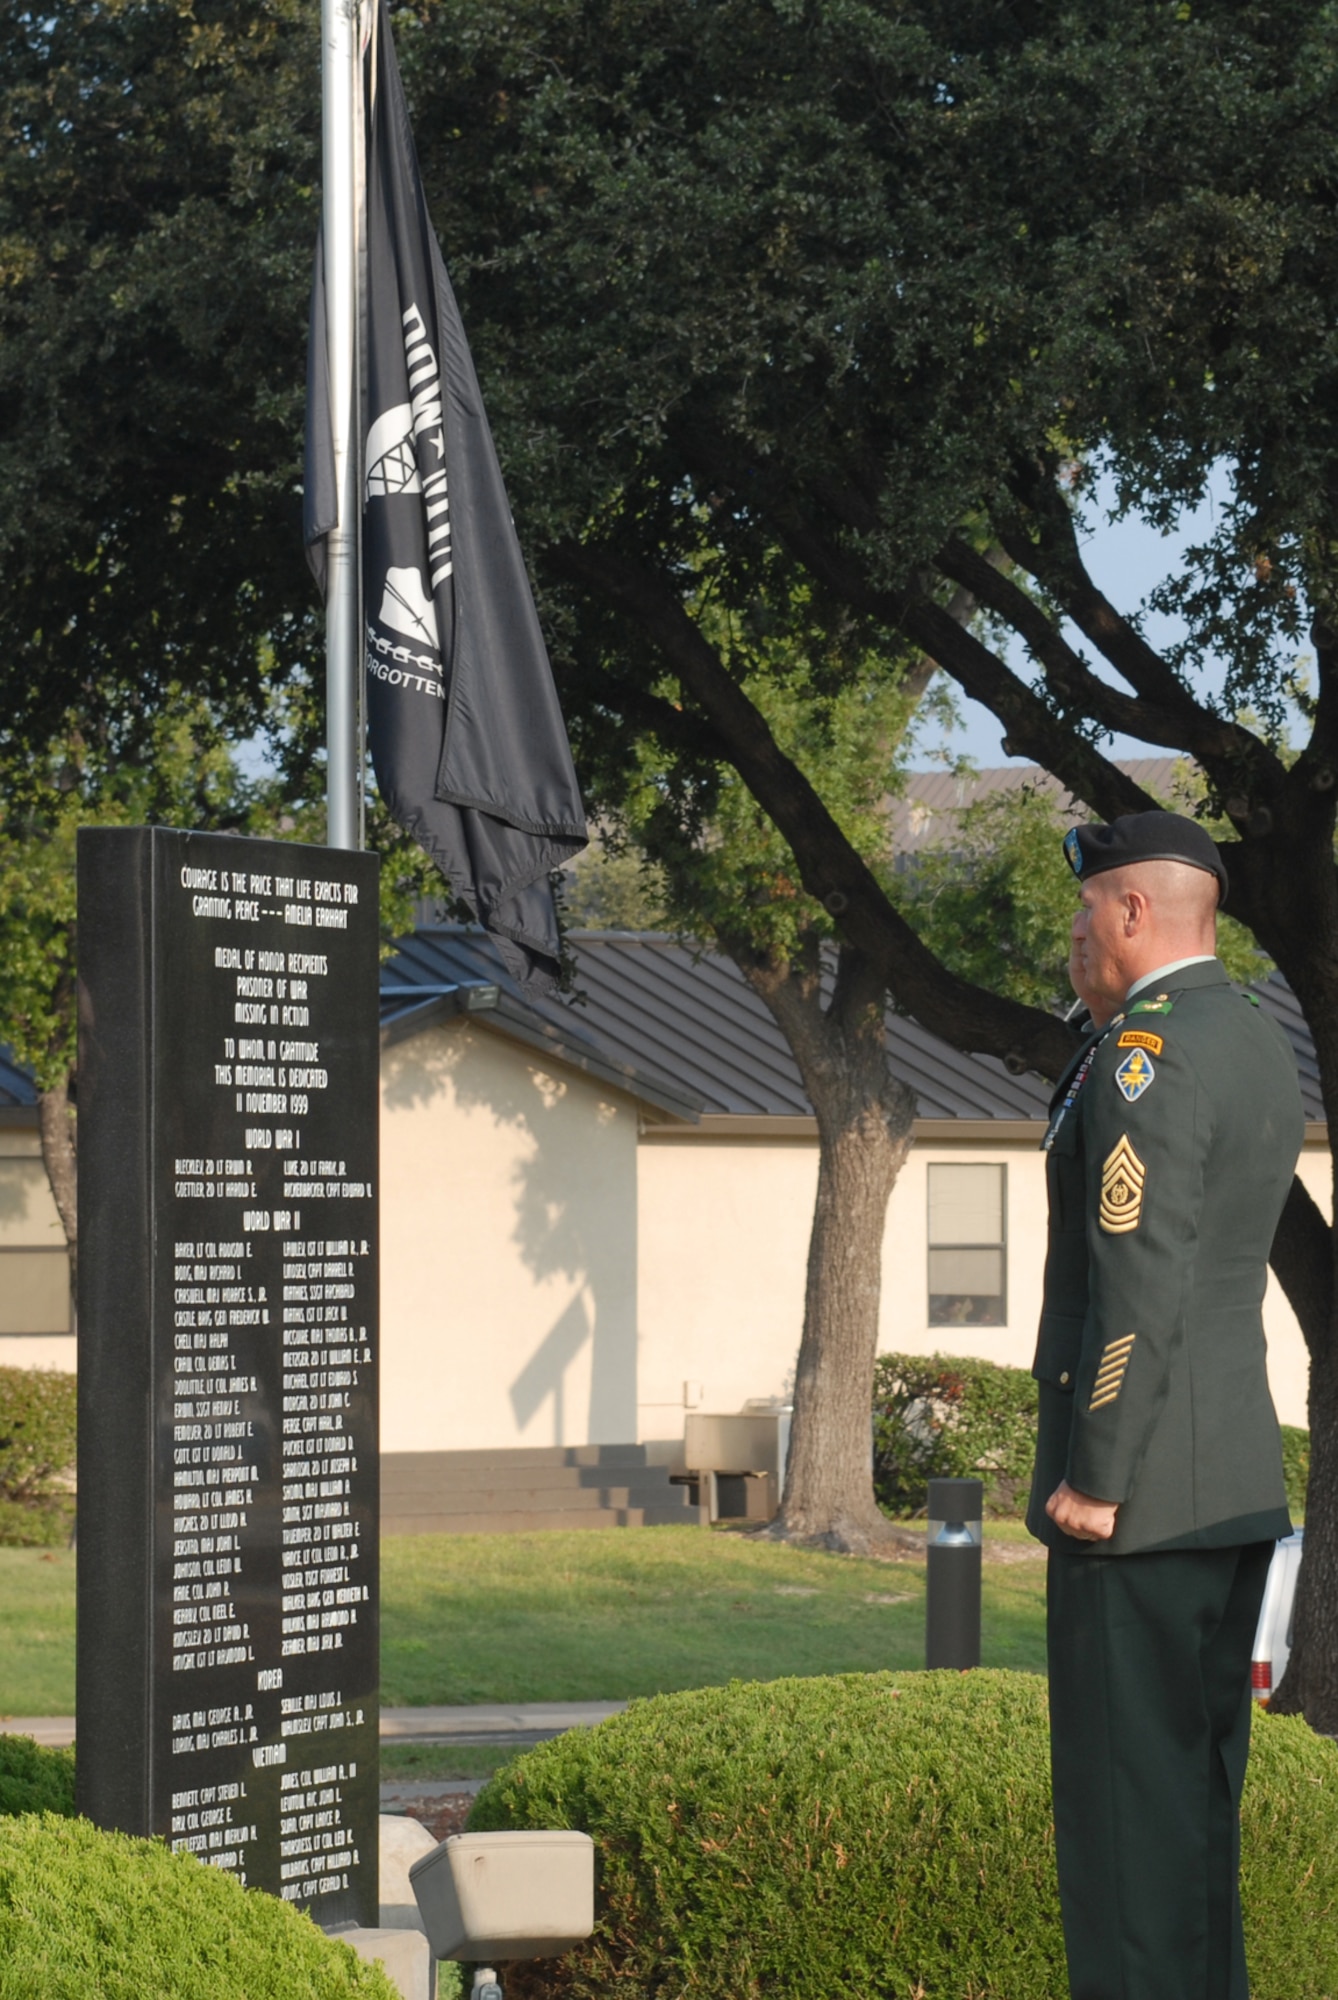 GOODFELLOW AIR FORCE BASE, Texas -- Army Command Sgt. Maj. Dan McCraw, 344th Military Intelligence Battalion, renders a salute to prisoners of war and those missing in action during the POW/MIA ceremony, Sept. 18, 2009. Base personnel stood a 24-hour vigil honoring POWs and MIAs. (U.S. Air Force photo/Staff Sgt. Laura R. McFarlane)